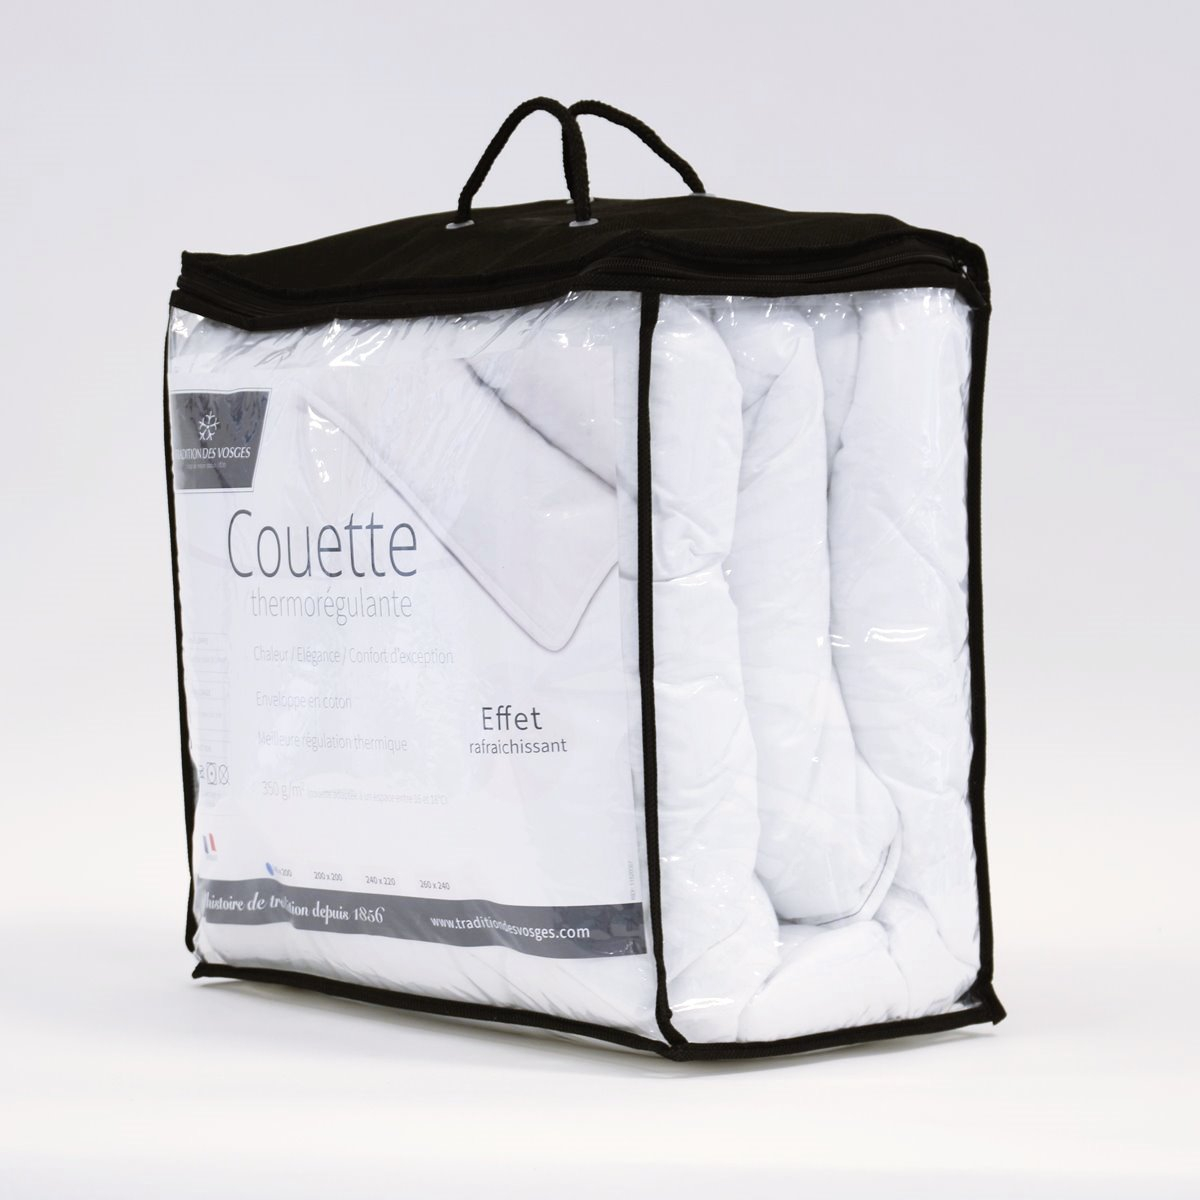 Couette 4 saisons Thermoregulante 350g